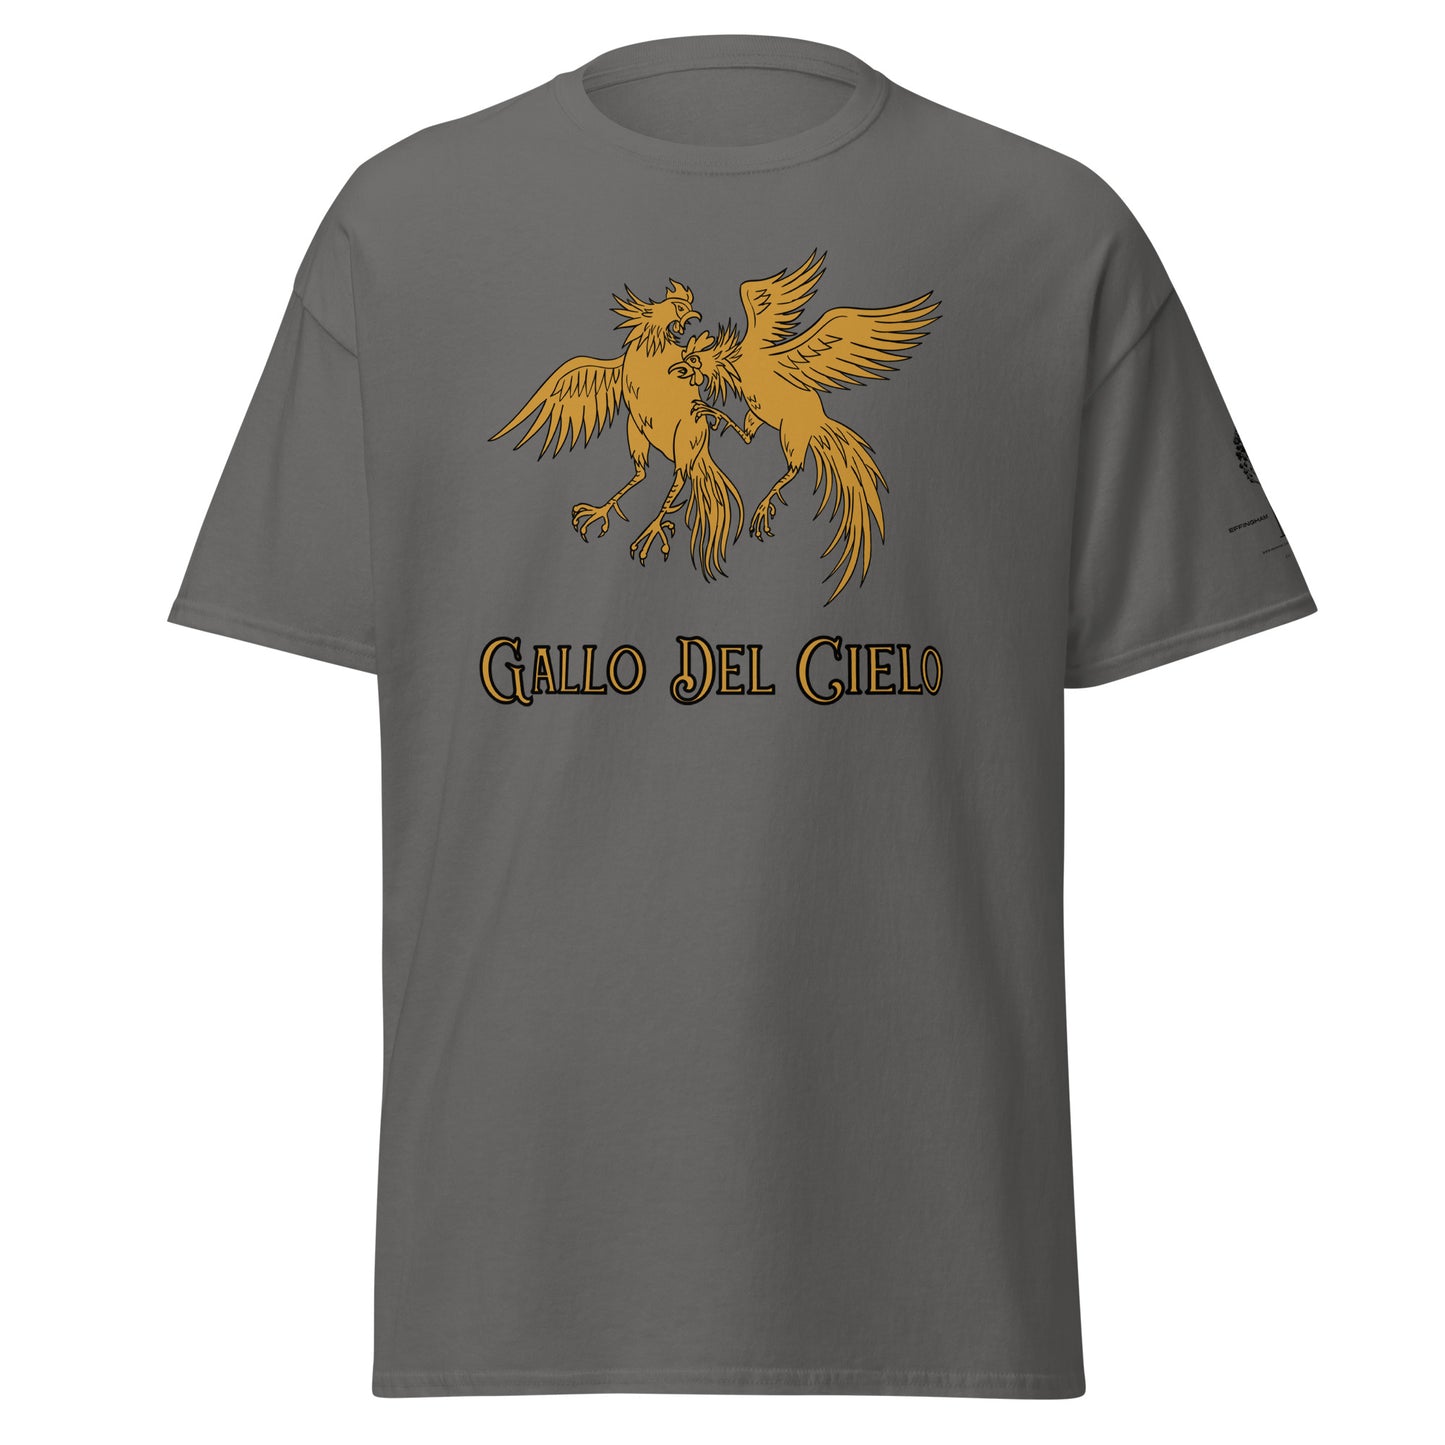 Gallo Del Cielo - classic tee - fighting rooster - cock fighting